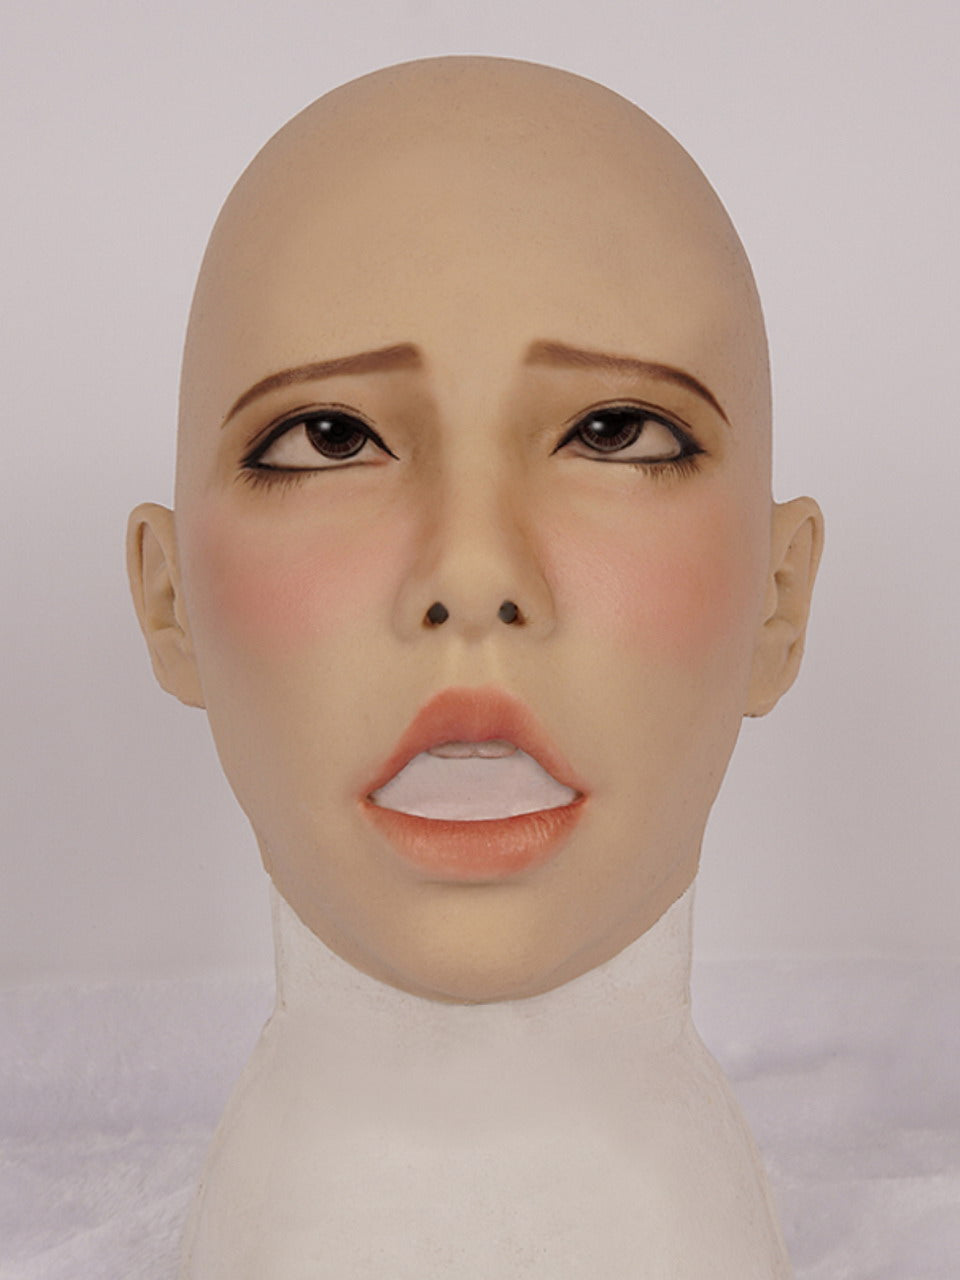 Full head Silicone Female Mask Poppy without cap Pull-Over Hood Corssdress Cosplay for TG CD Dragqueen Ladyboy